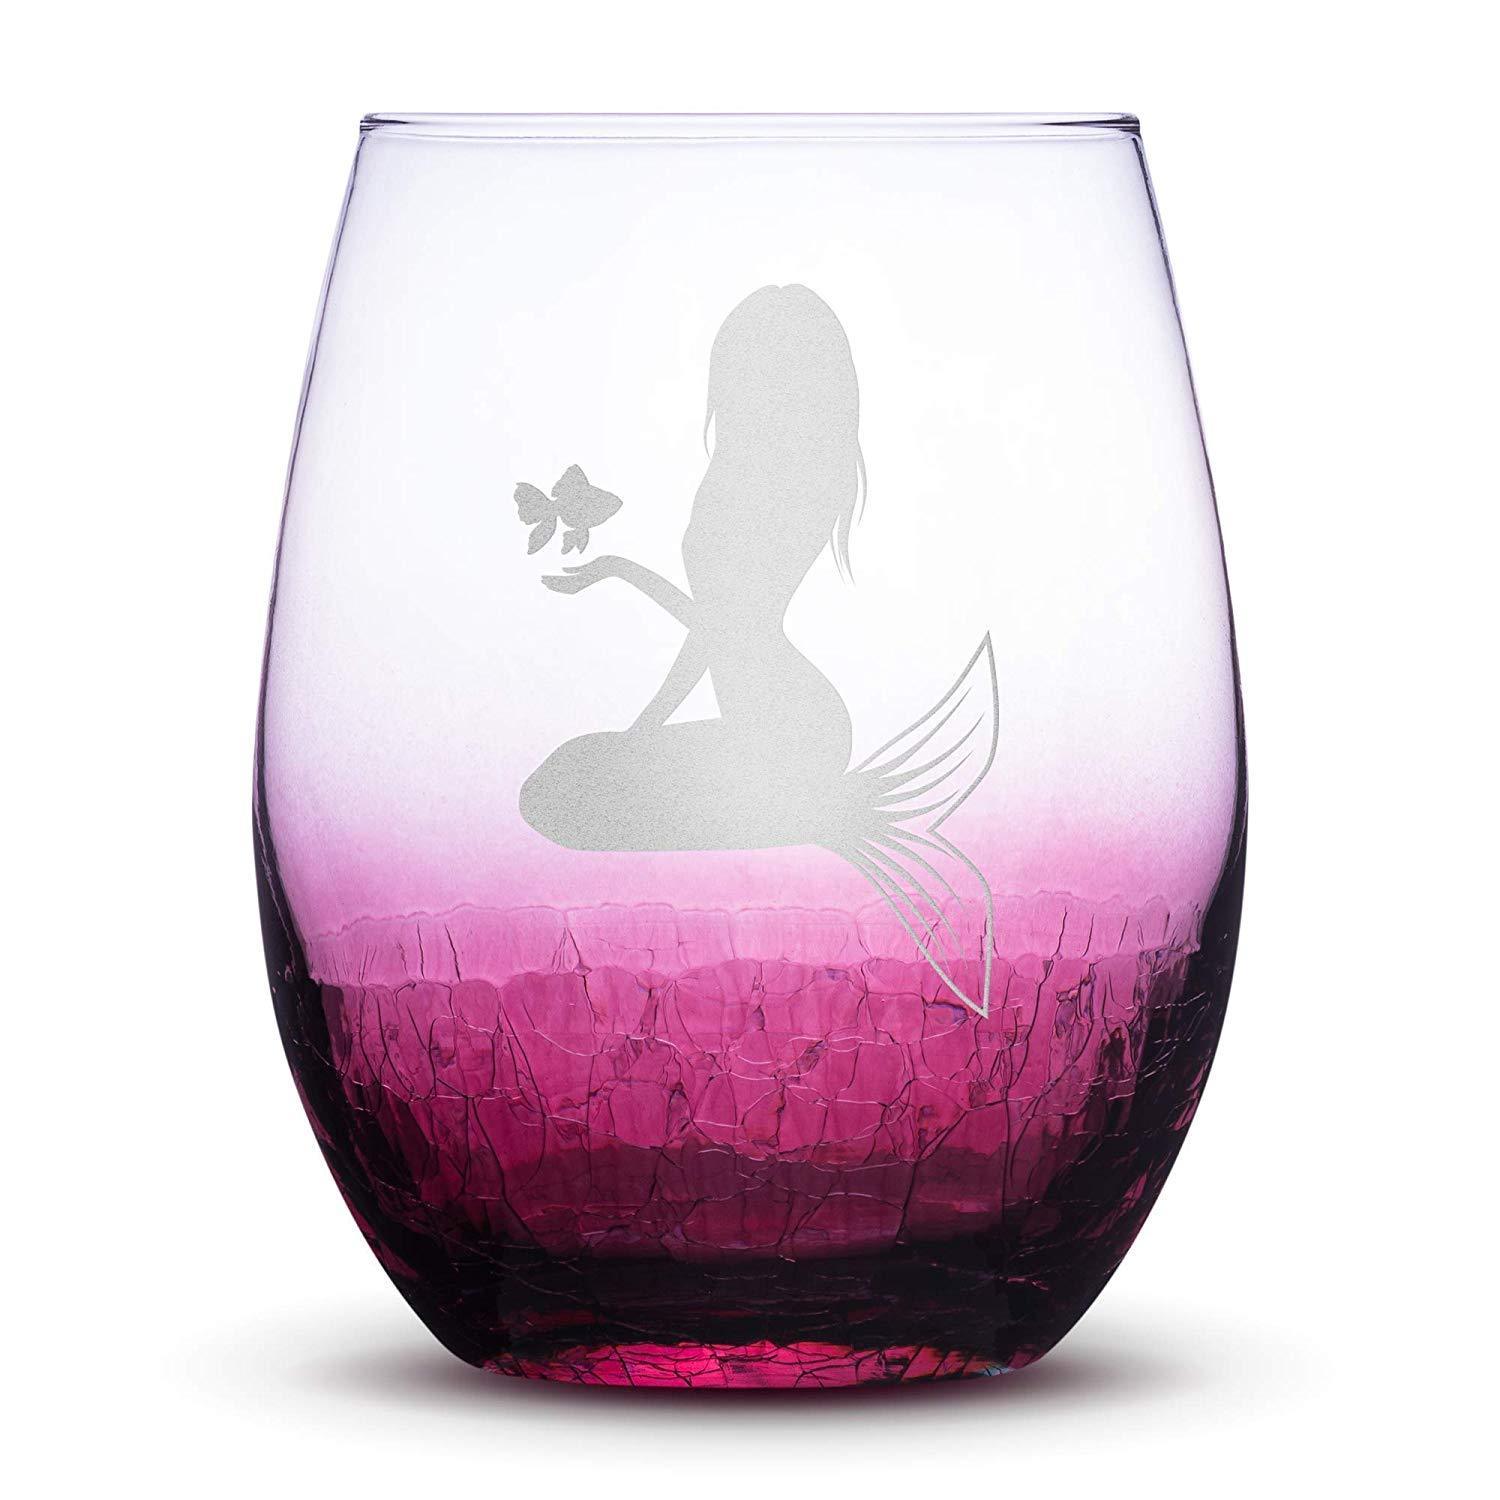 Crackle Light Red Wine Glass, Mermaid Kneeling Fish Design #5, Hand Etched, 16oz by Integrity Bottles